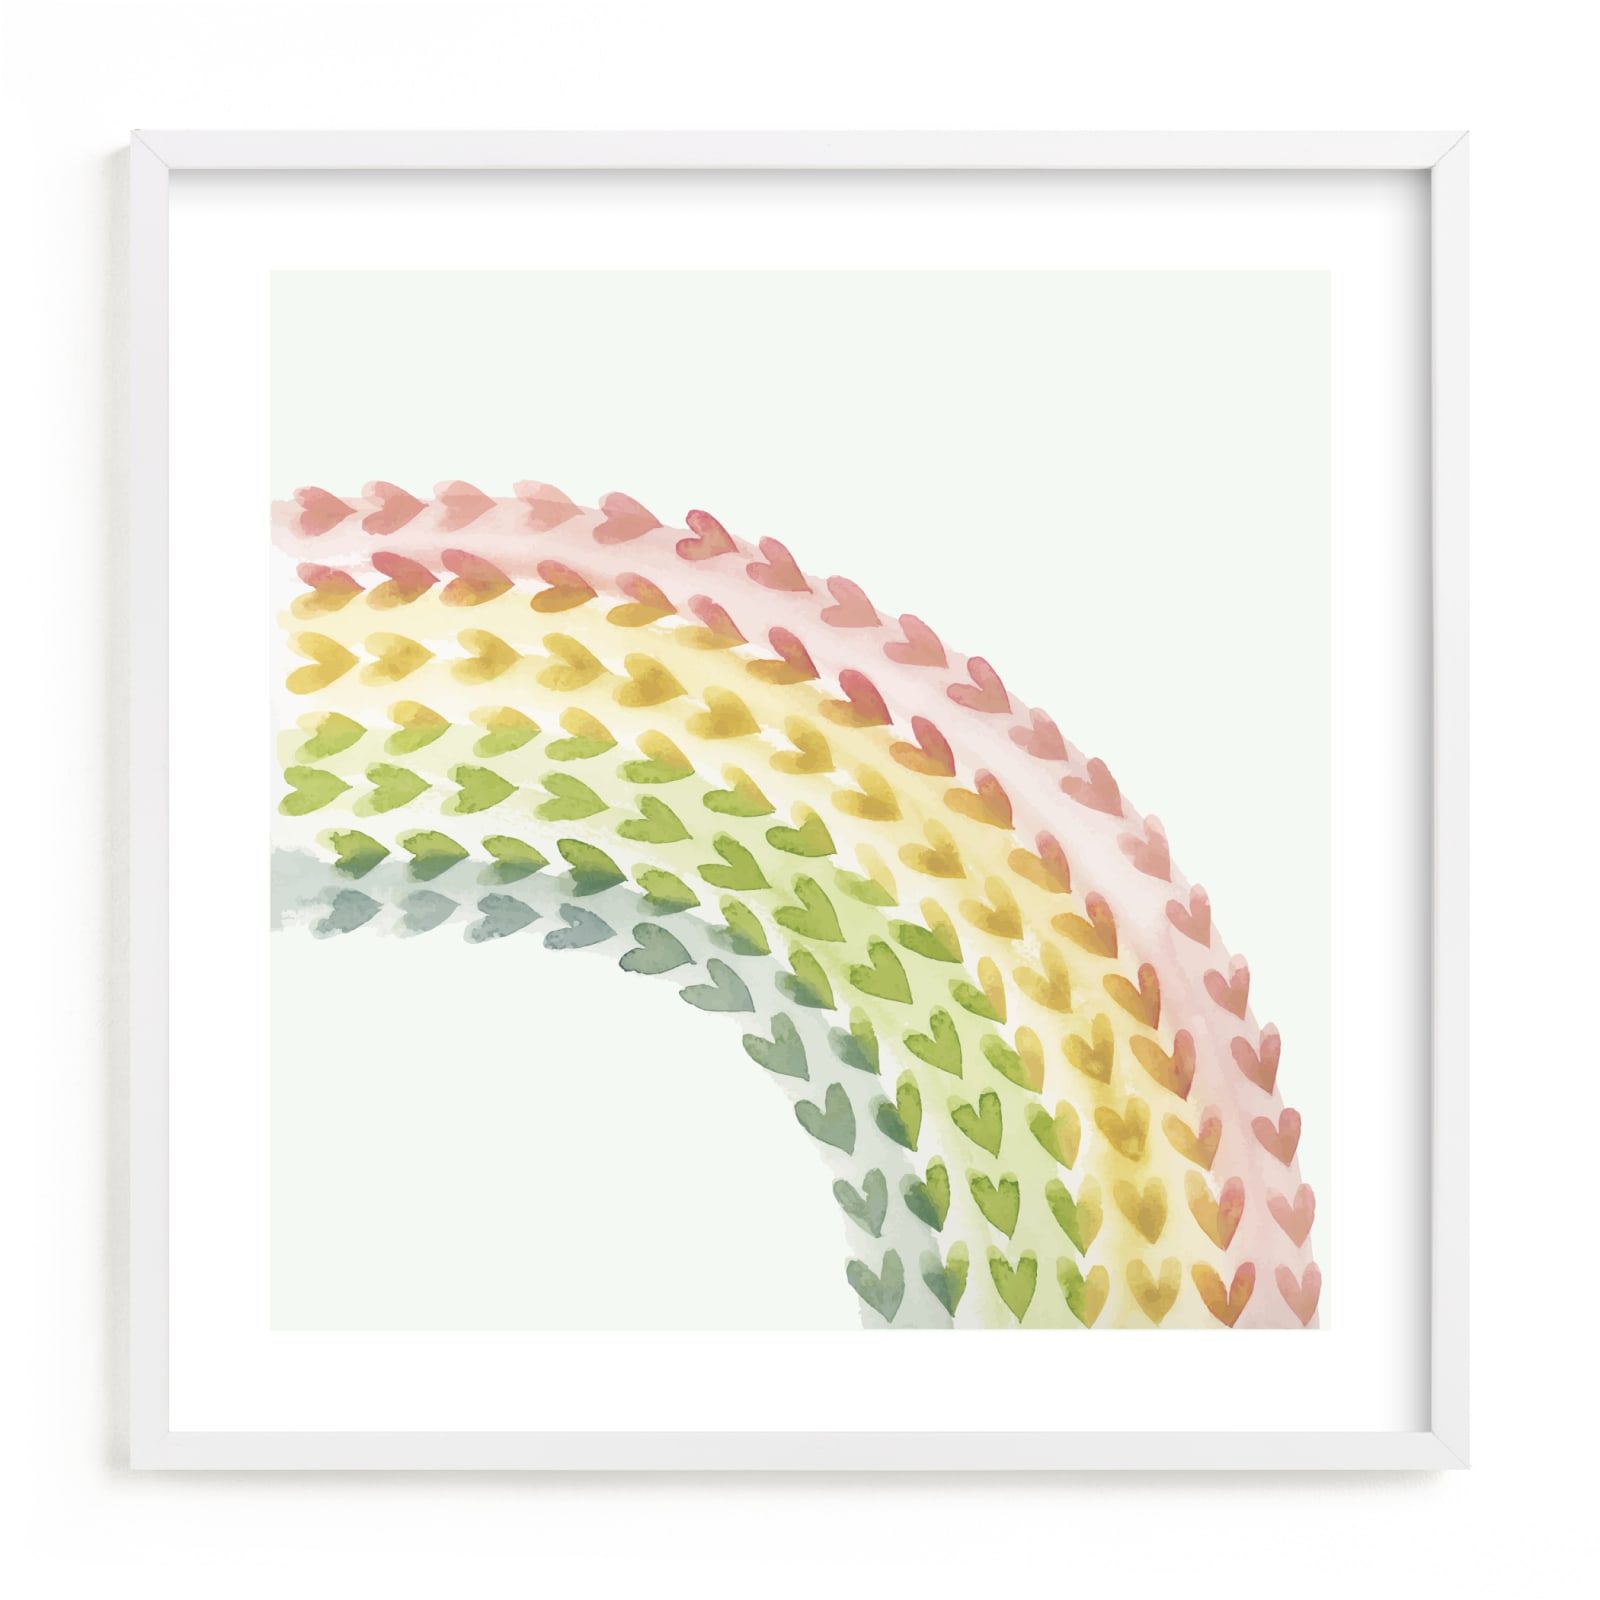 "Somewhere in the Rainbow" - Open Edition Children's Art Print by Tina Faselli. | Minted